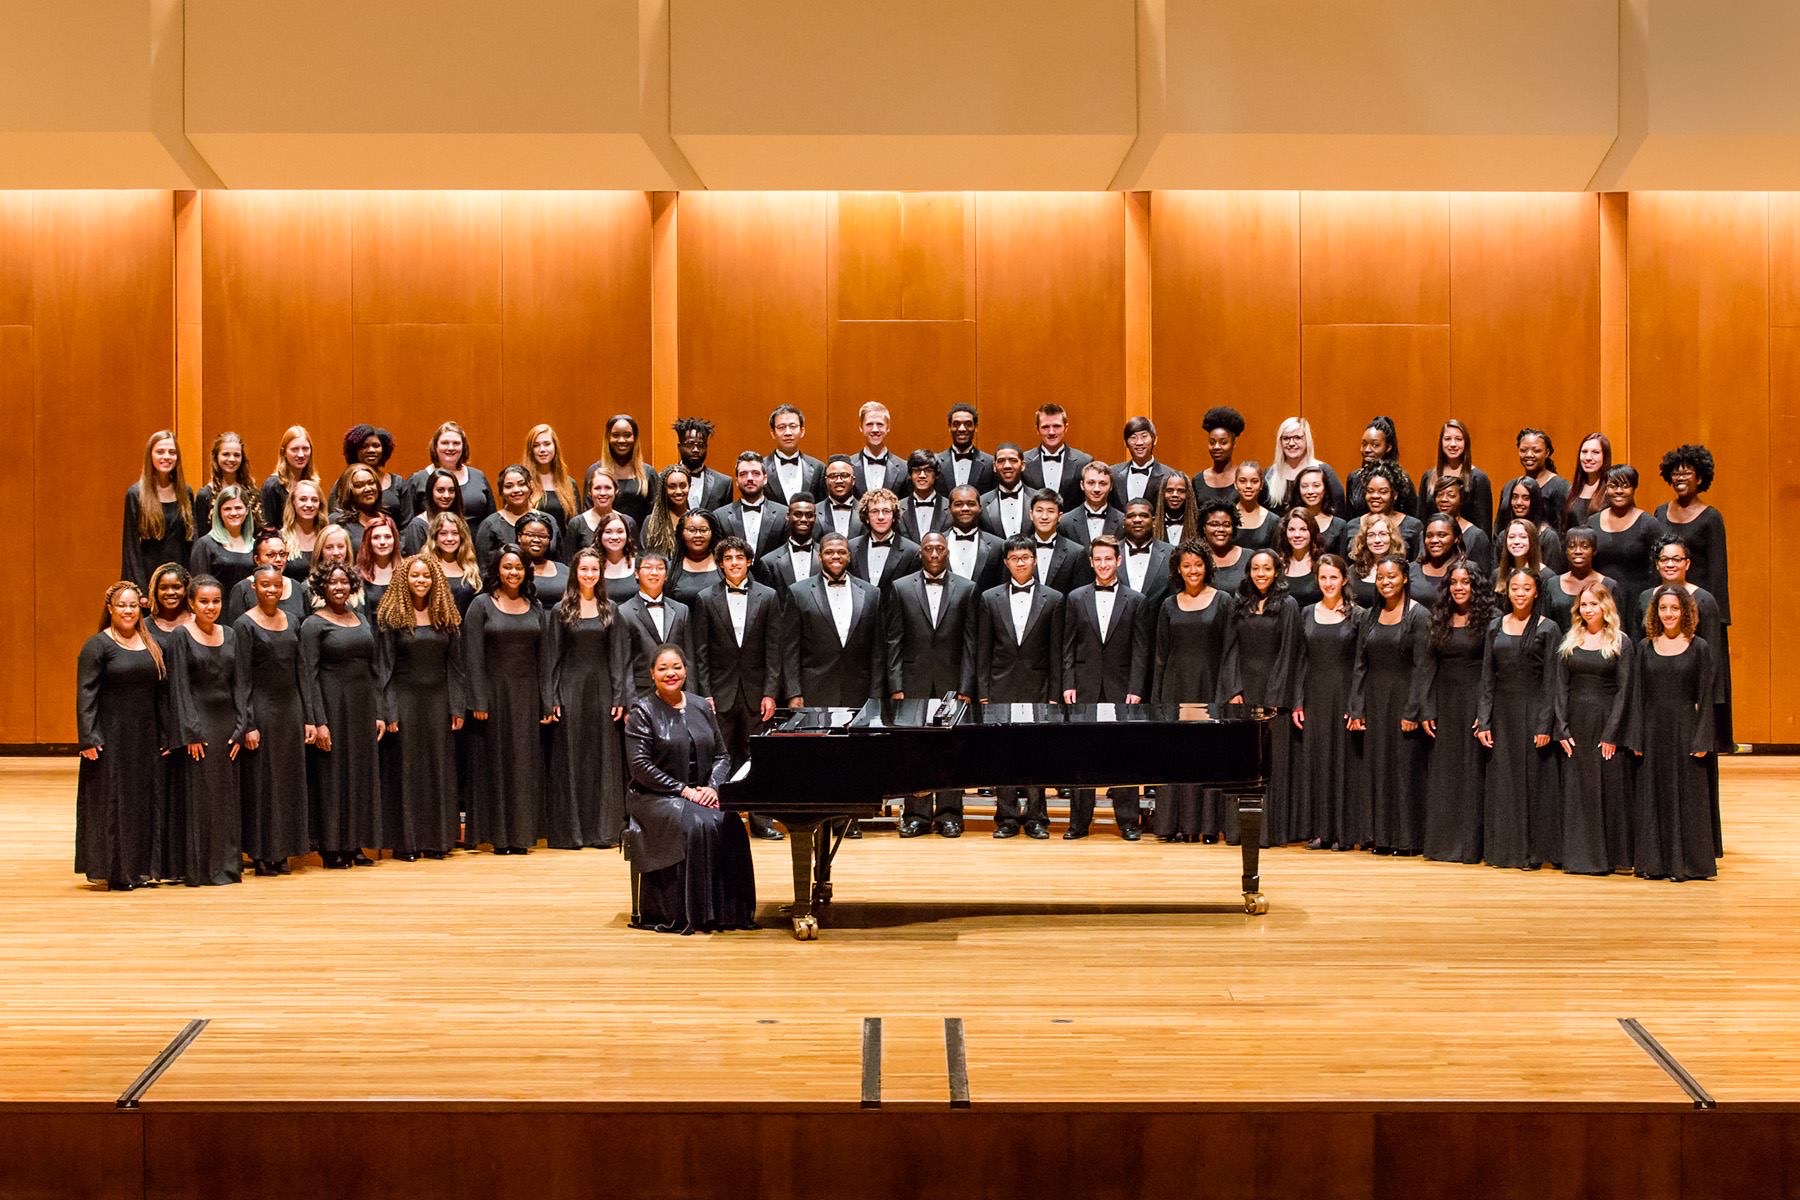 The entire University of Illinois Black Chorus onstage with their conductor.